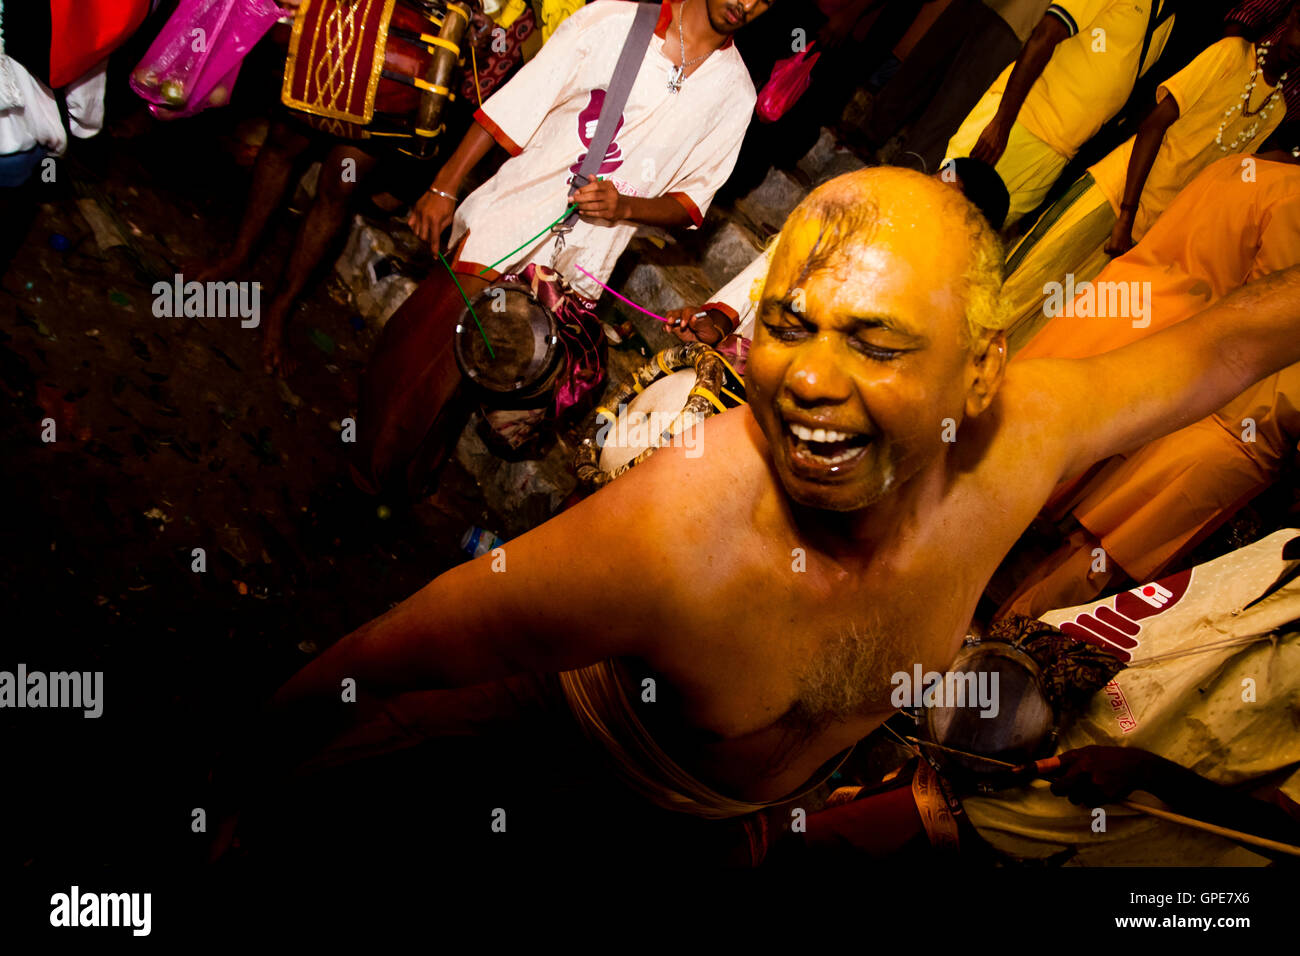 A man prepares to enter a trance and be pierced at the Thaipusam festival, Batu Caves, Malaysia. Stock Photo